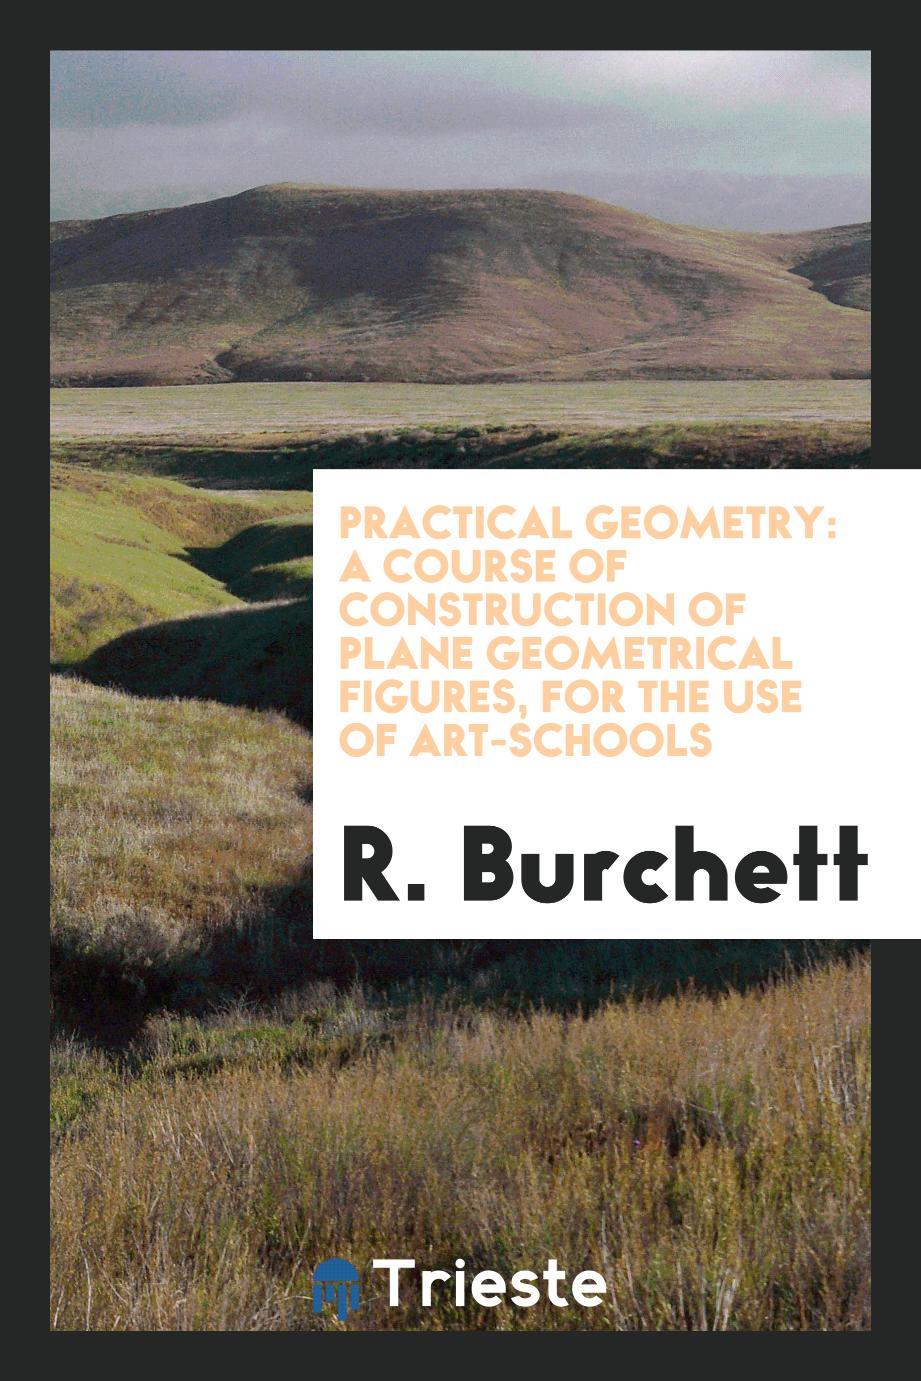 Practical Geometry: A Course of Construction of Plane Geometrical Figures, for the Use of Art-Schools